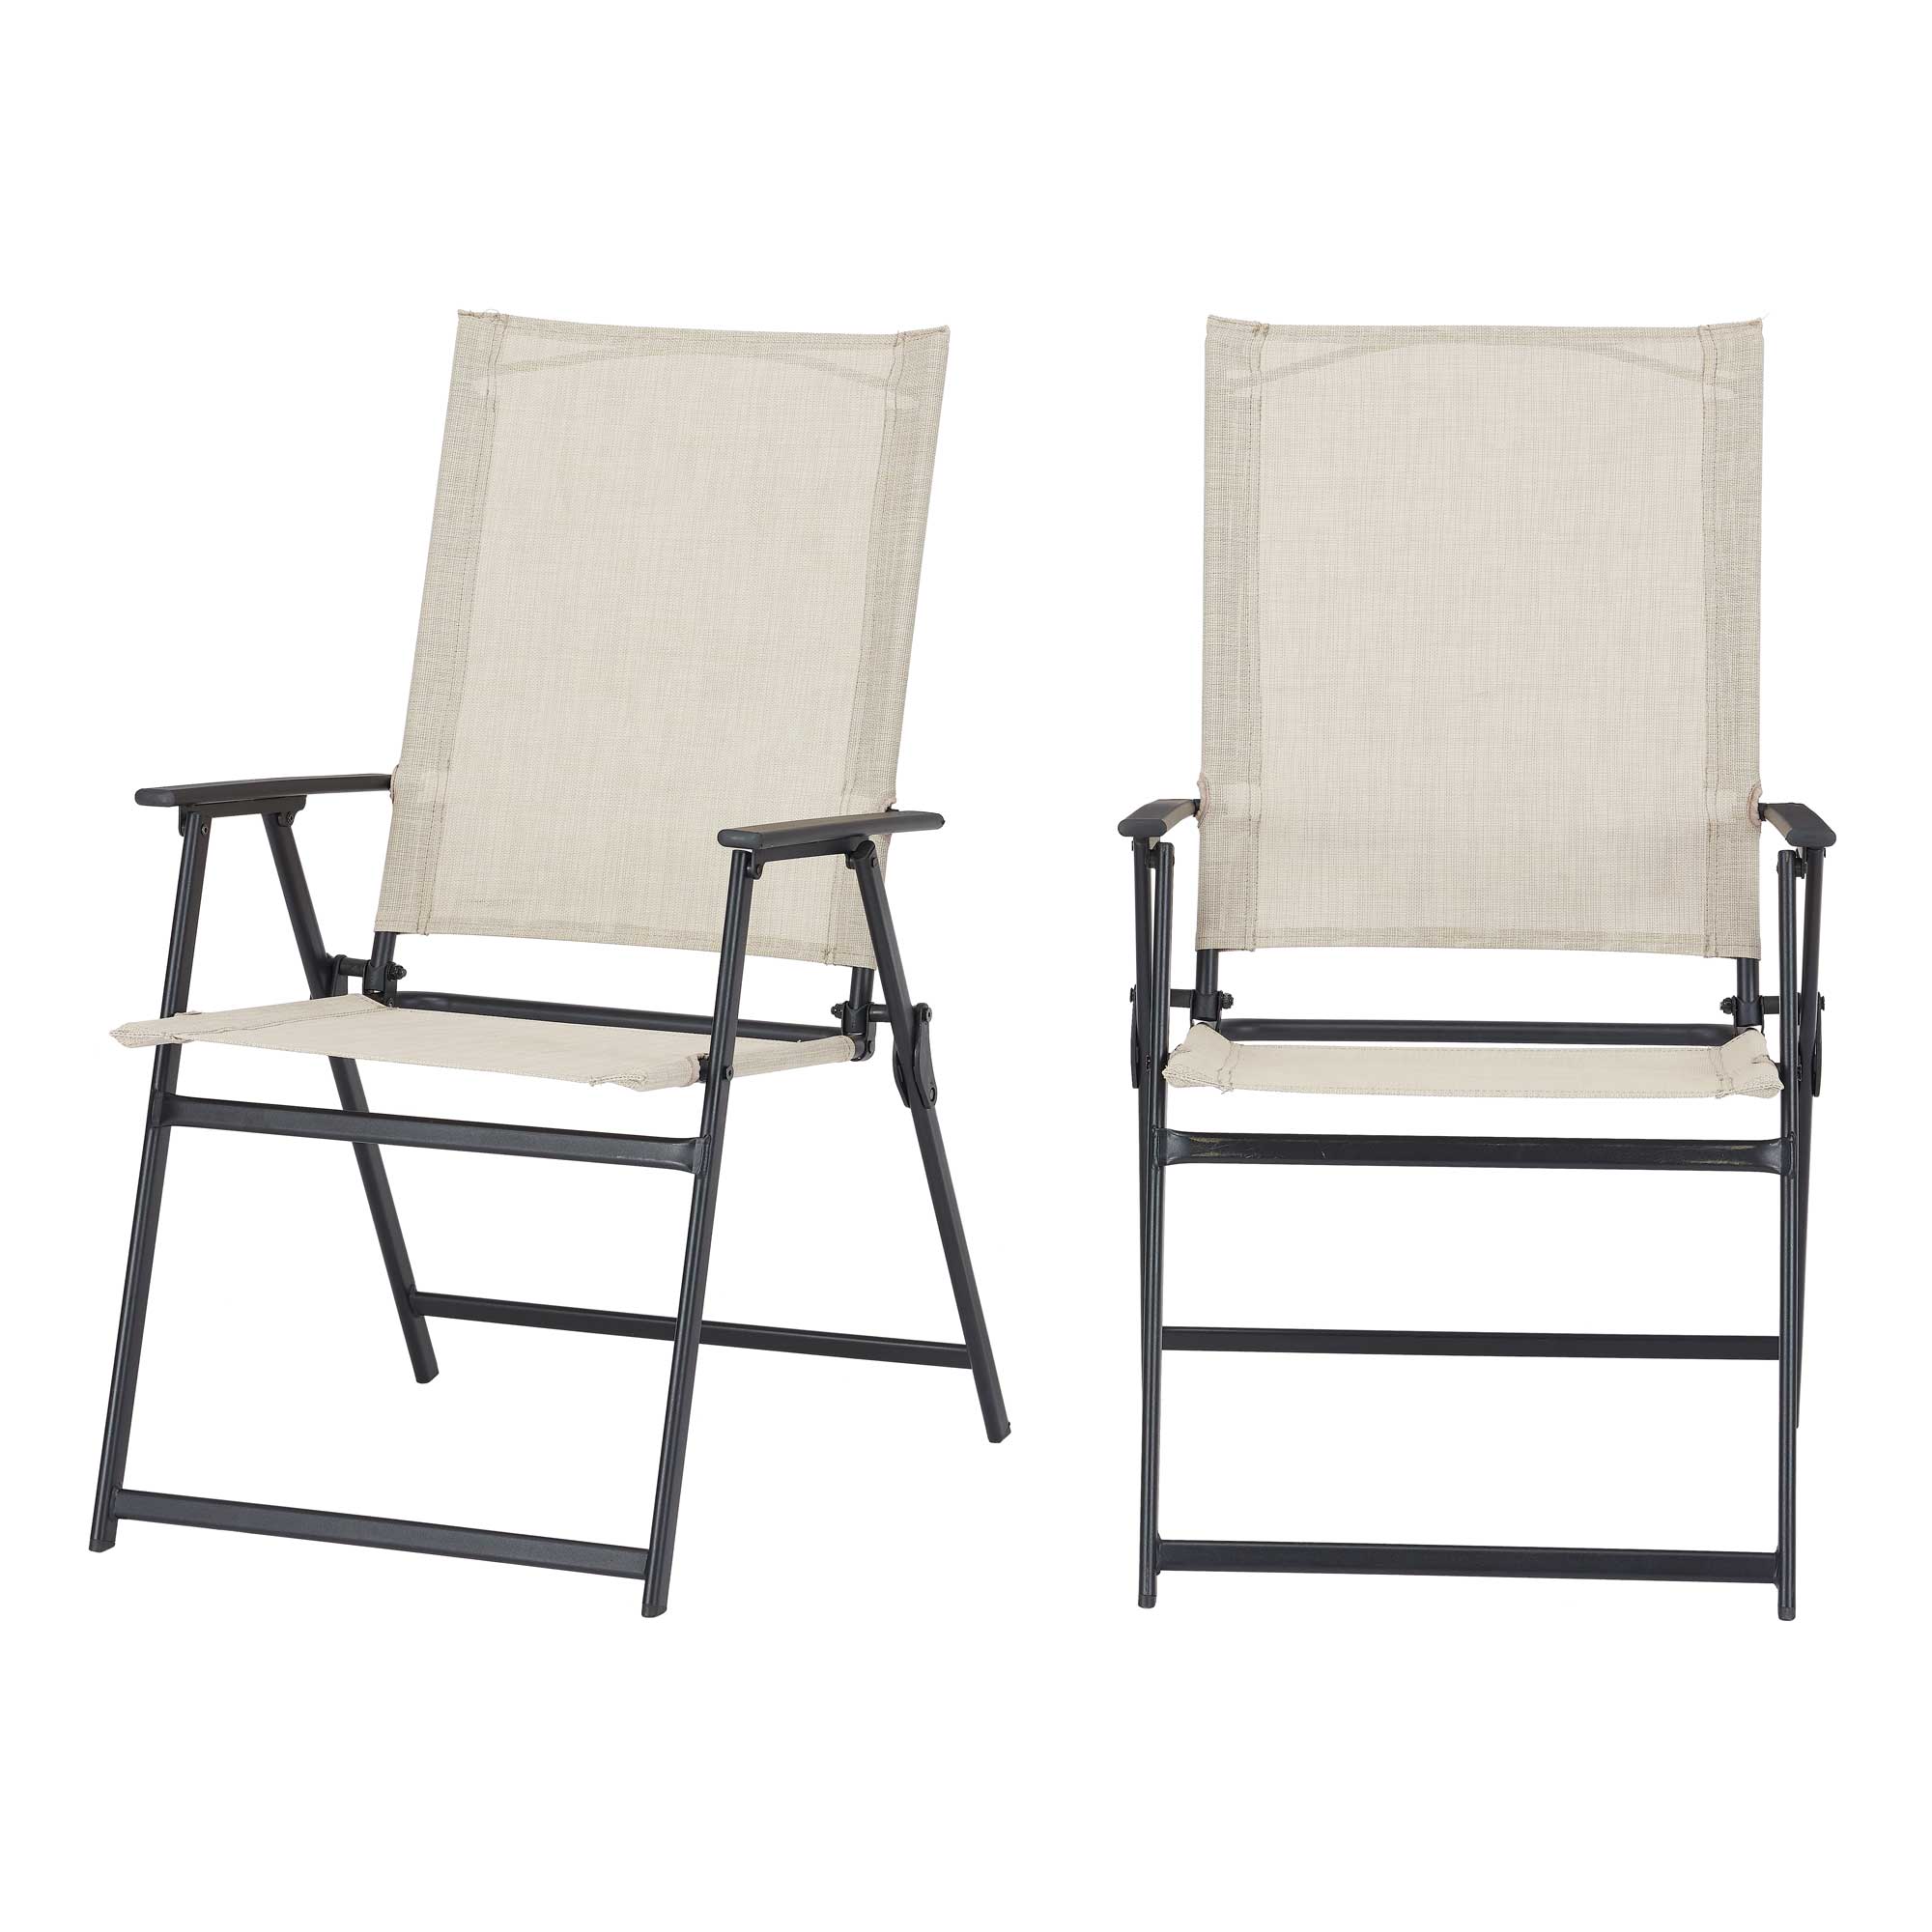 Mainstays Greyson Steel and Sling Folding Adult Outdoor Patio Armchair, Beige (Set of 2) - image 2 of 8